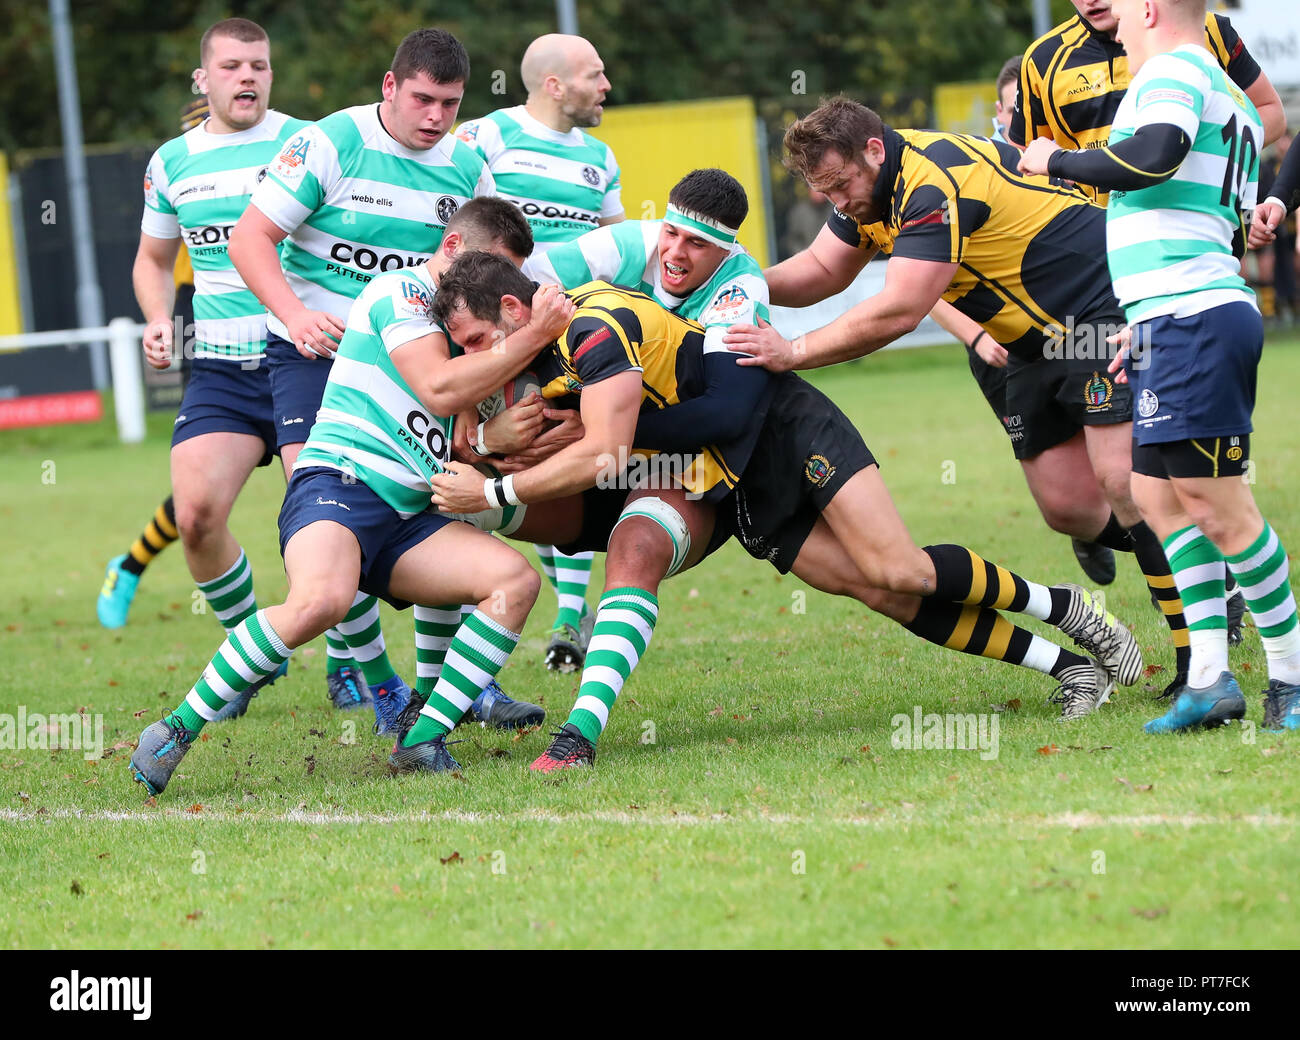 Leicester, England. Rugby Union, Hinckley rfc v South Leicester rfc.      Josh Smith goes over for Hinckley after 15 minutes  during the RFU National League 2 North (NL2N) game played at the Leicester  Road Stadium.  © Phil Hutchinson / Alamy Live News Stock Photo